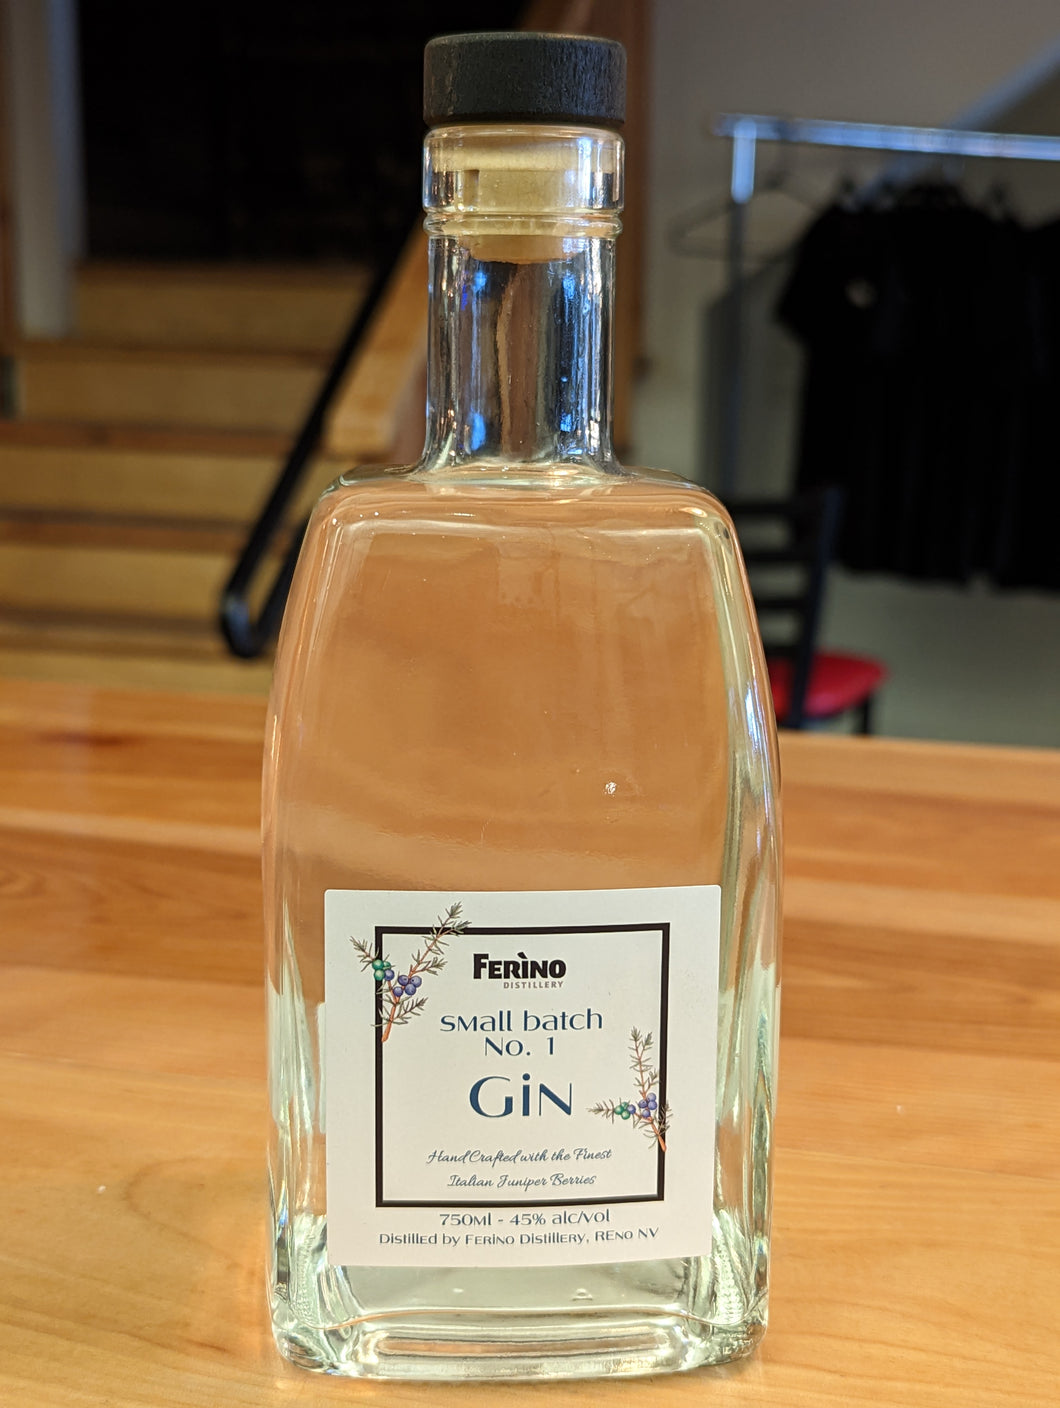 LOCAL ONLY Pickup Order - Ferino Small Batch Gin No. 1